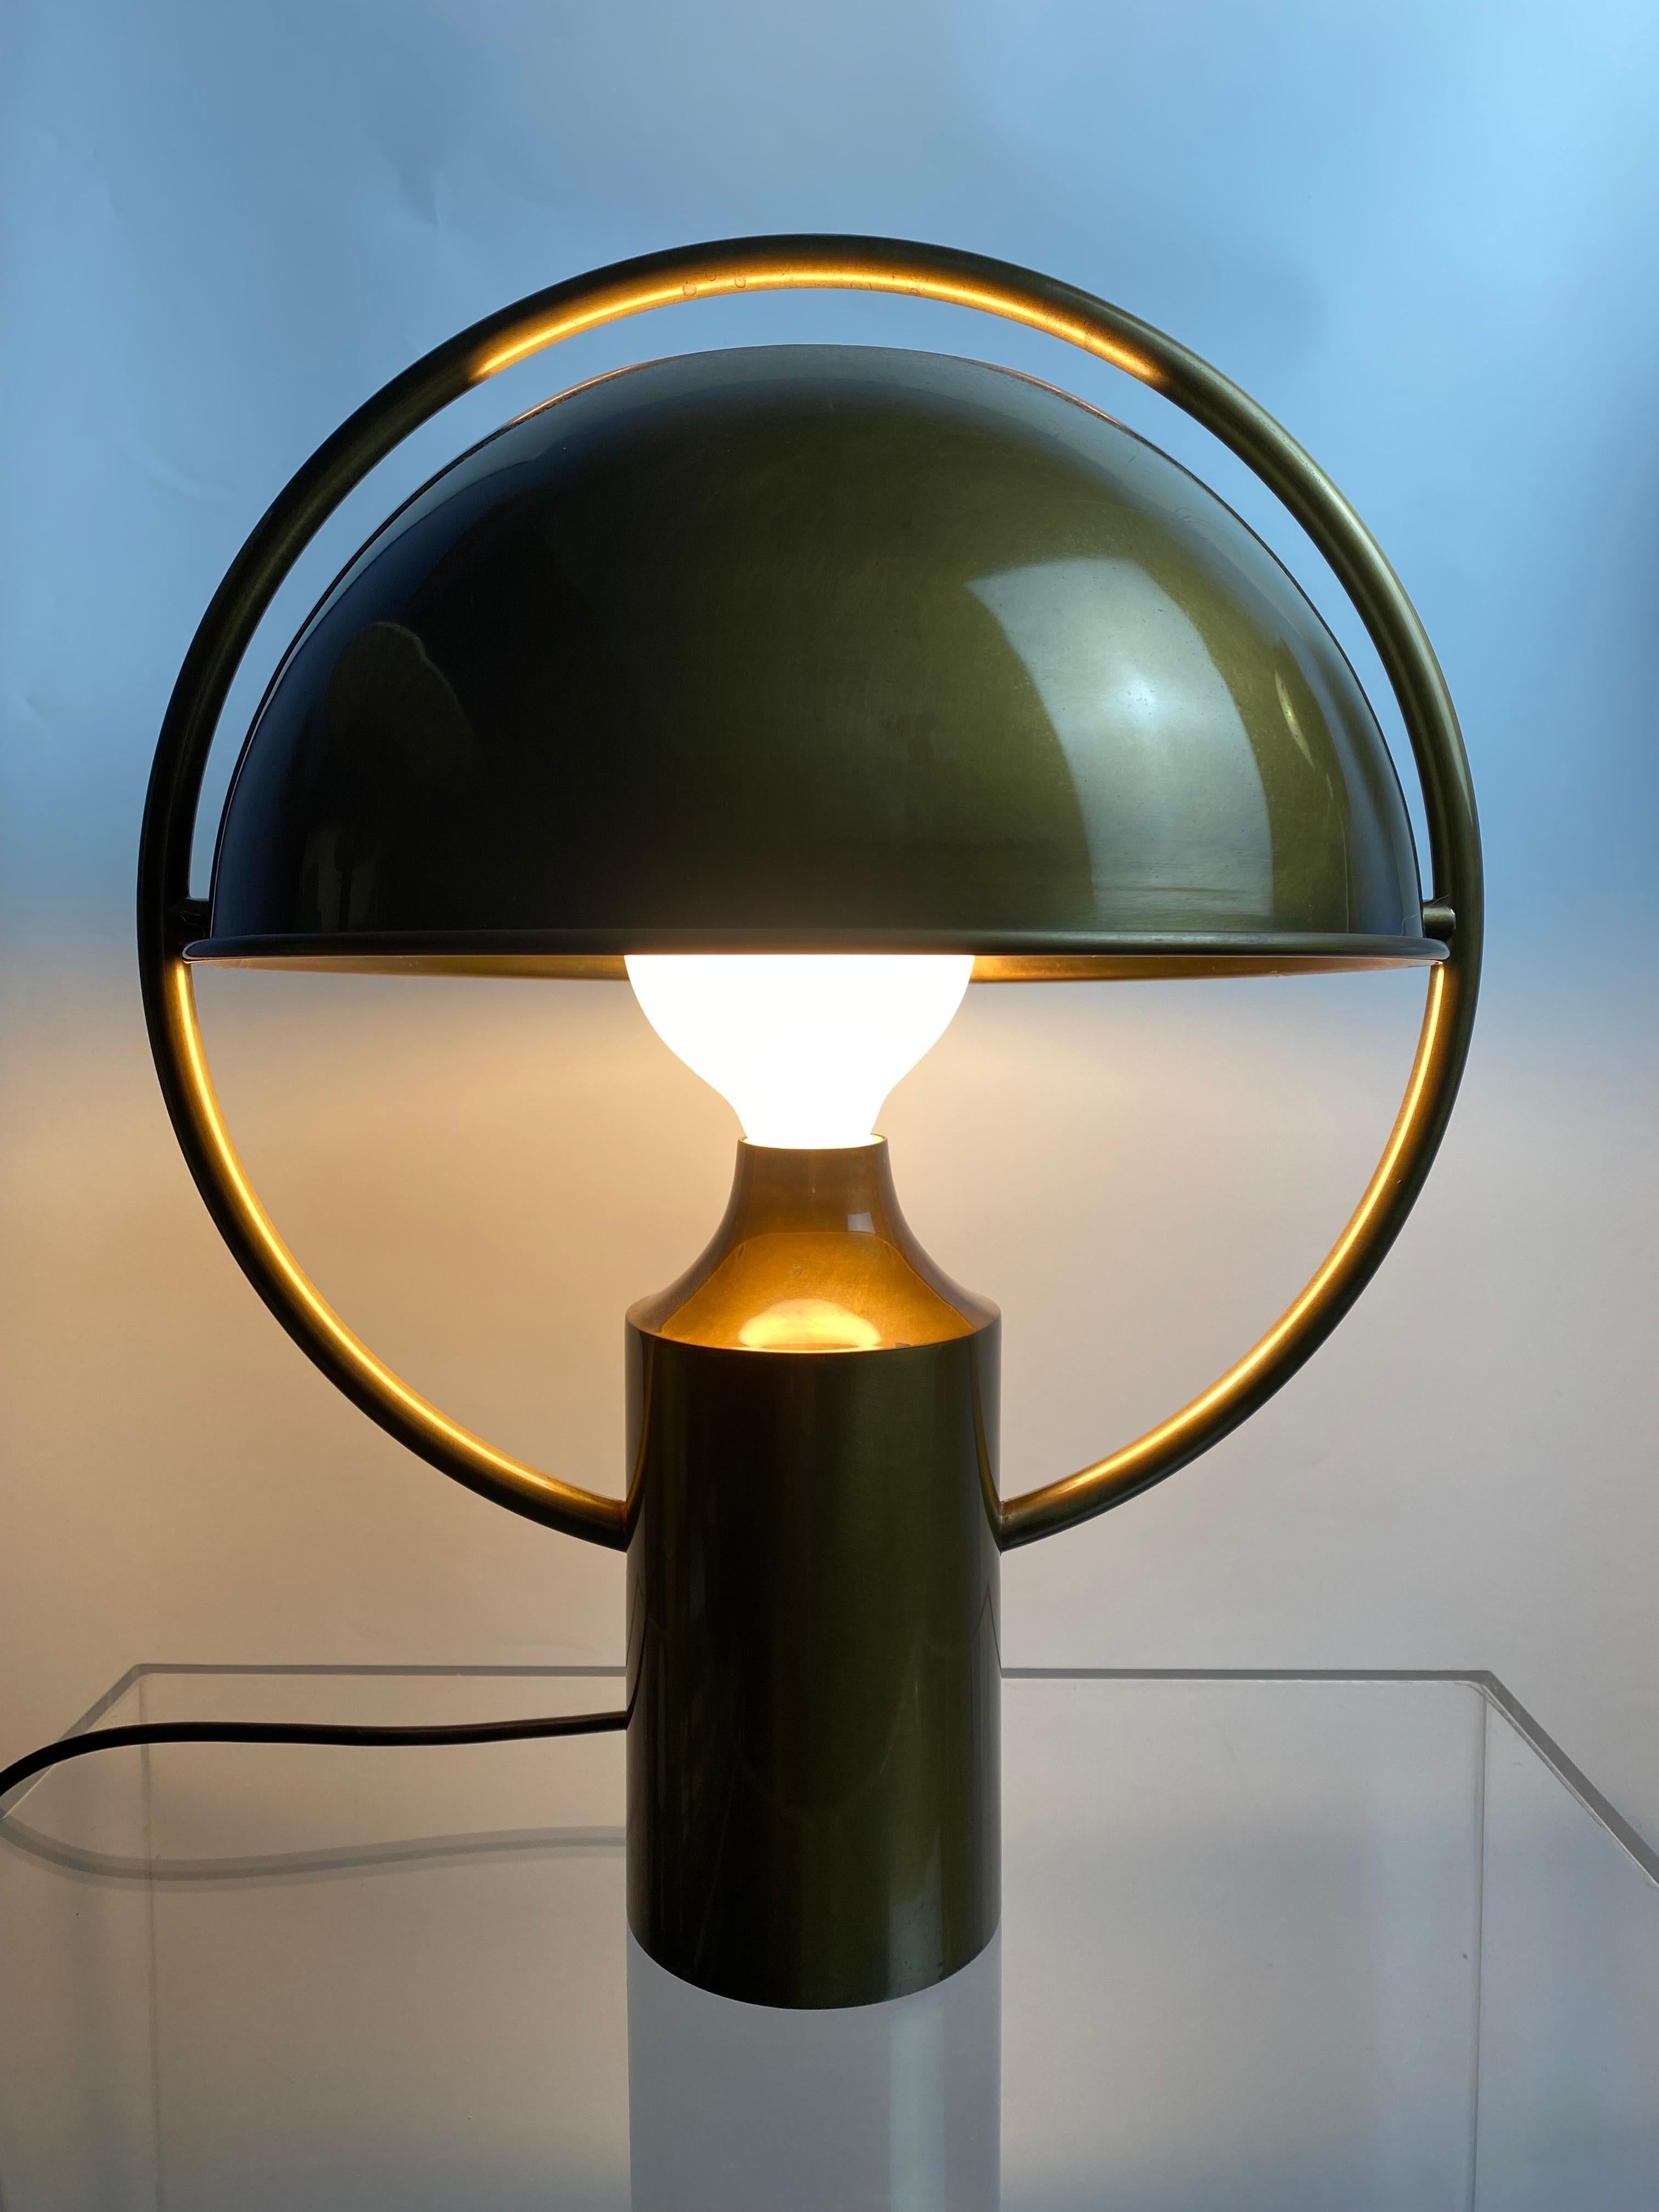 An extremely rare and early High Quality Table lamp in solid brass by Florian Schulz .
The lampshade is rotatable to have the best opportunities in changing the light directions.
Designer was Günter Schulz,the father of Florian Schulz.
The lamp runs